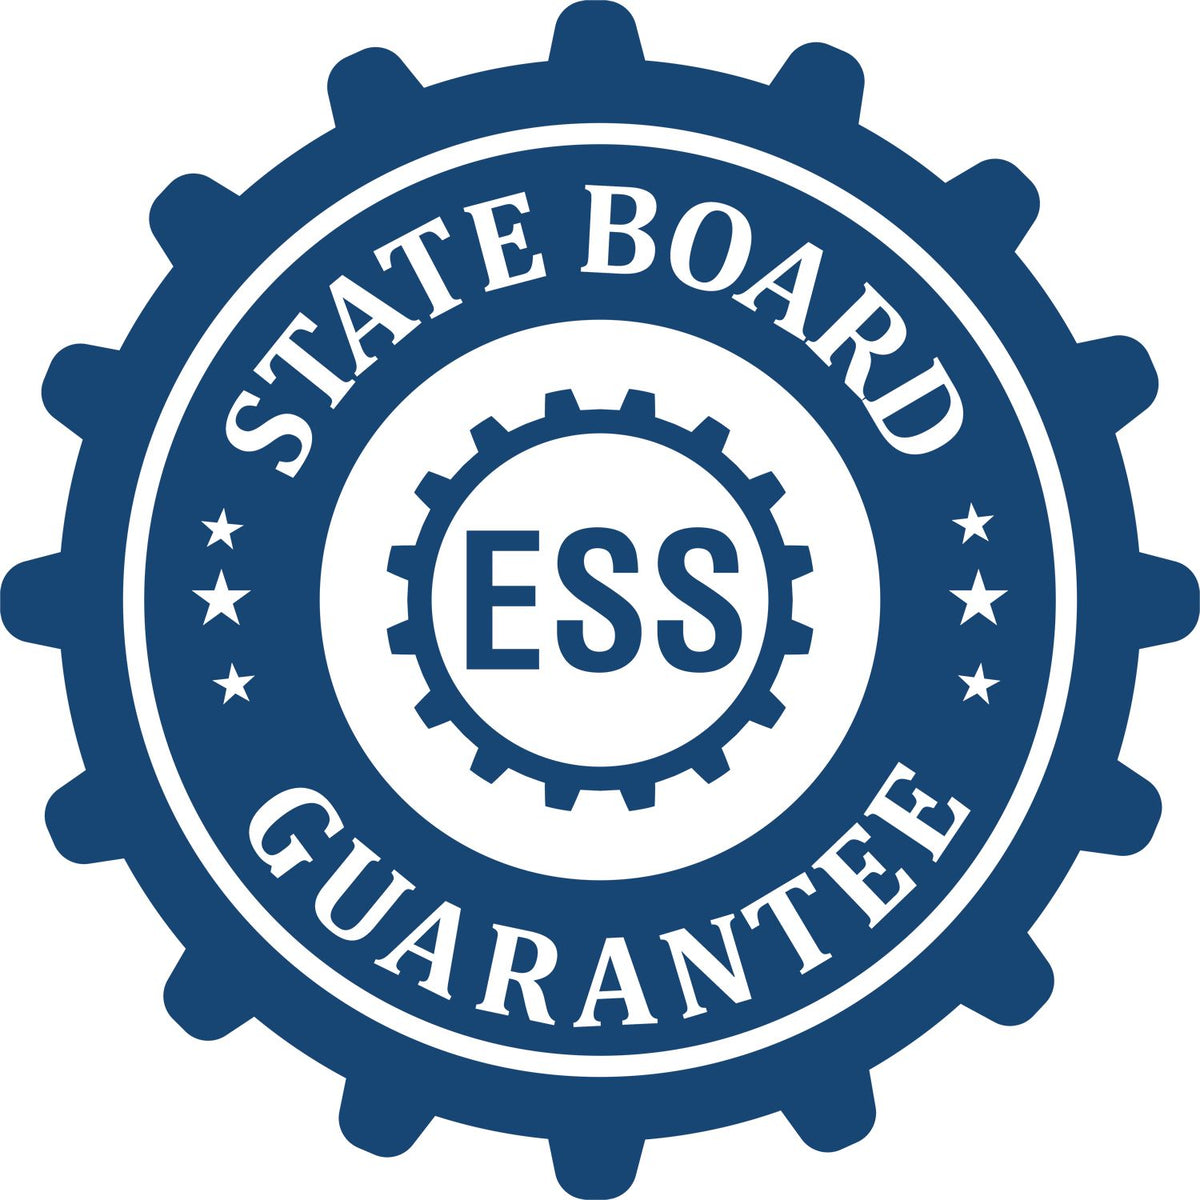 An emblem in a gear shape illustrating a state board guarantee for the Hybrid Connecticut Landscape Architect Seal